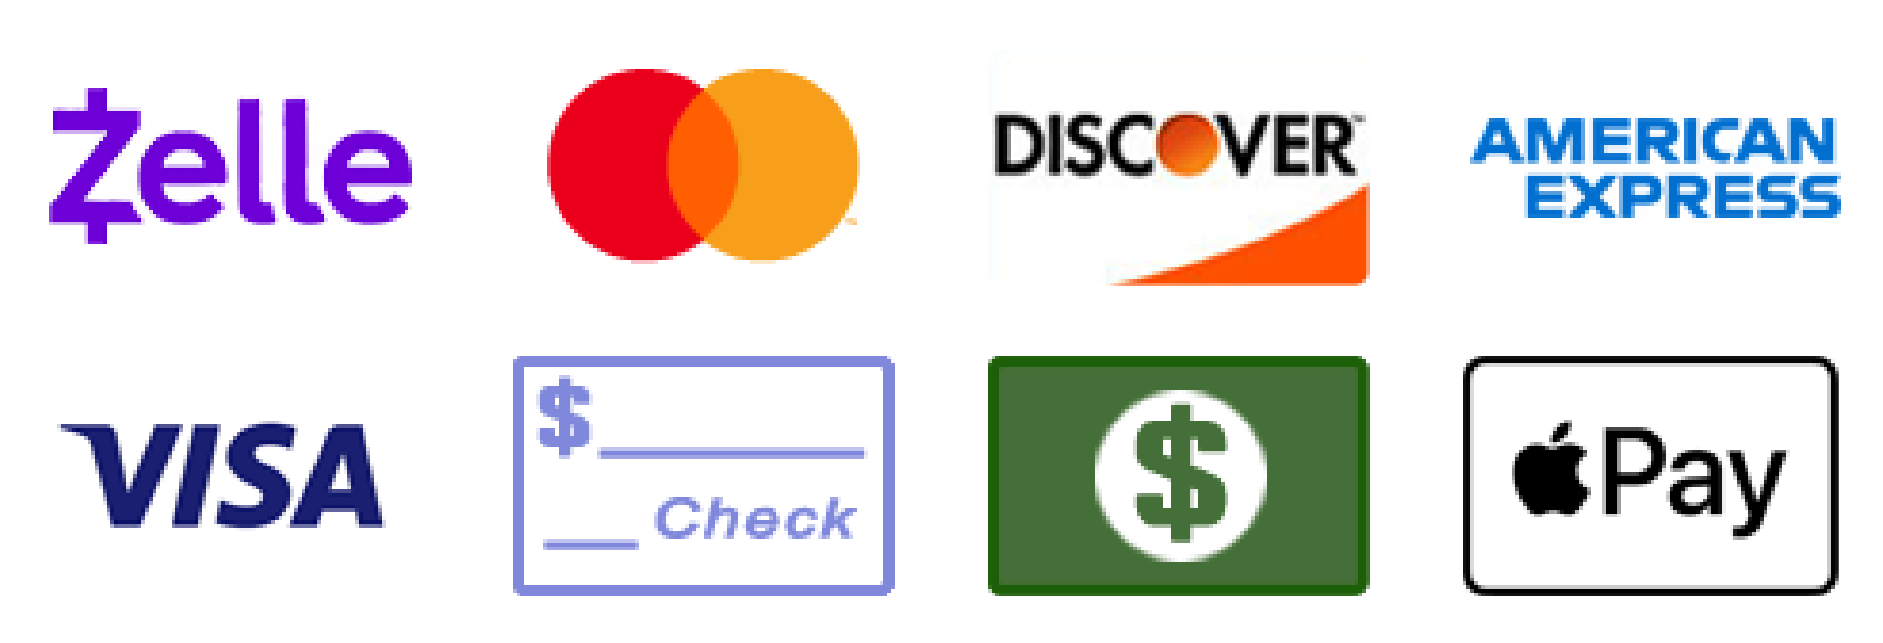 logos for zelle discover american express visa check and i pay